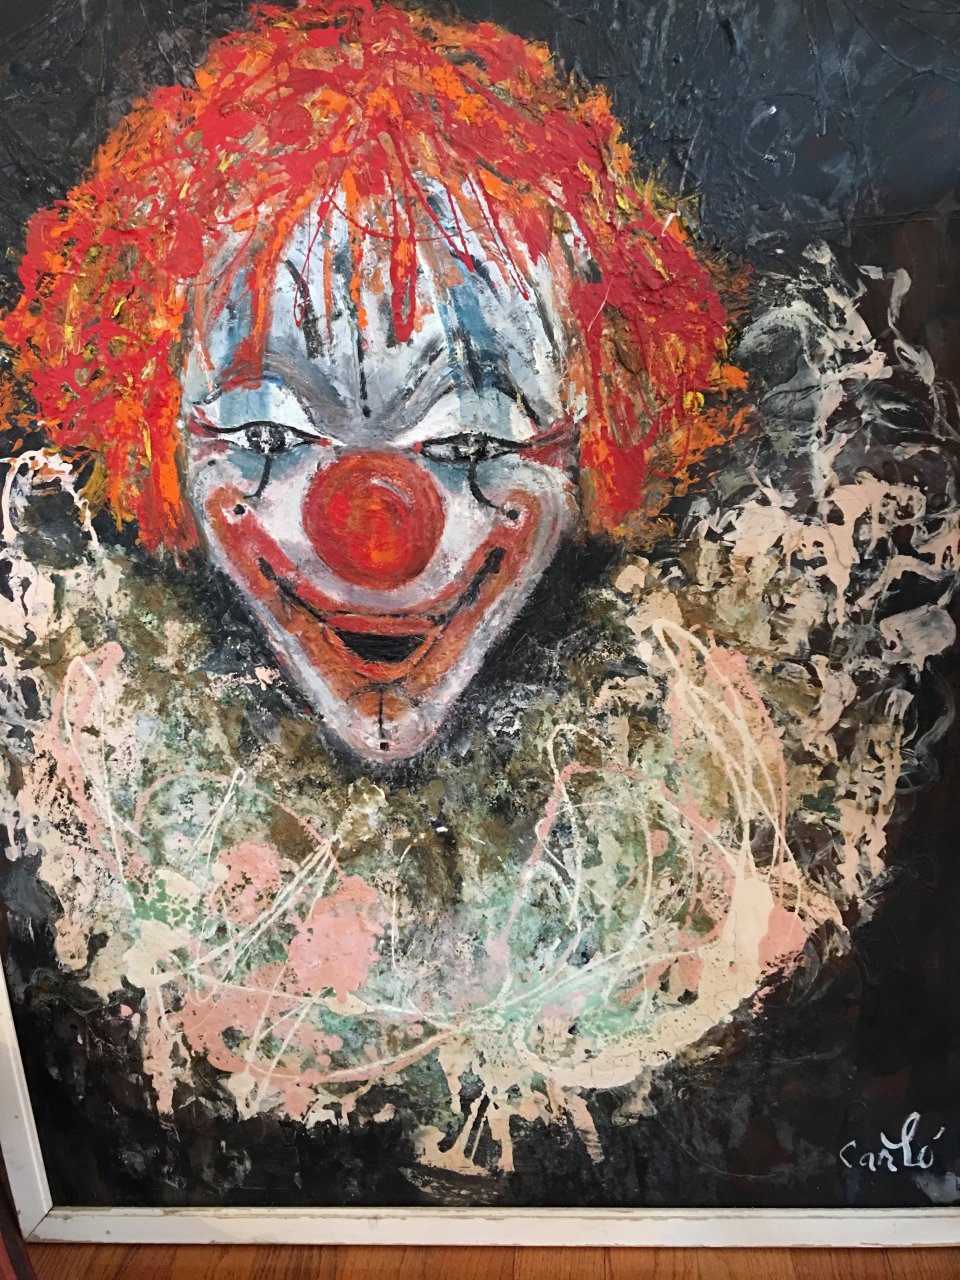 Carló Clown Oil Painting On Chalkboard | Artifact Collectors